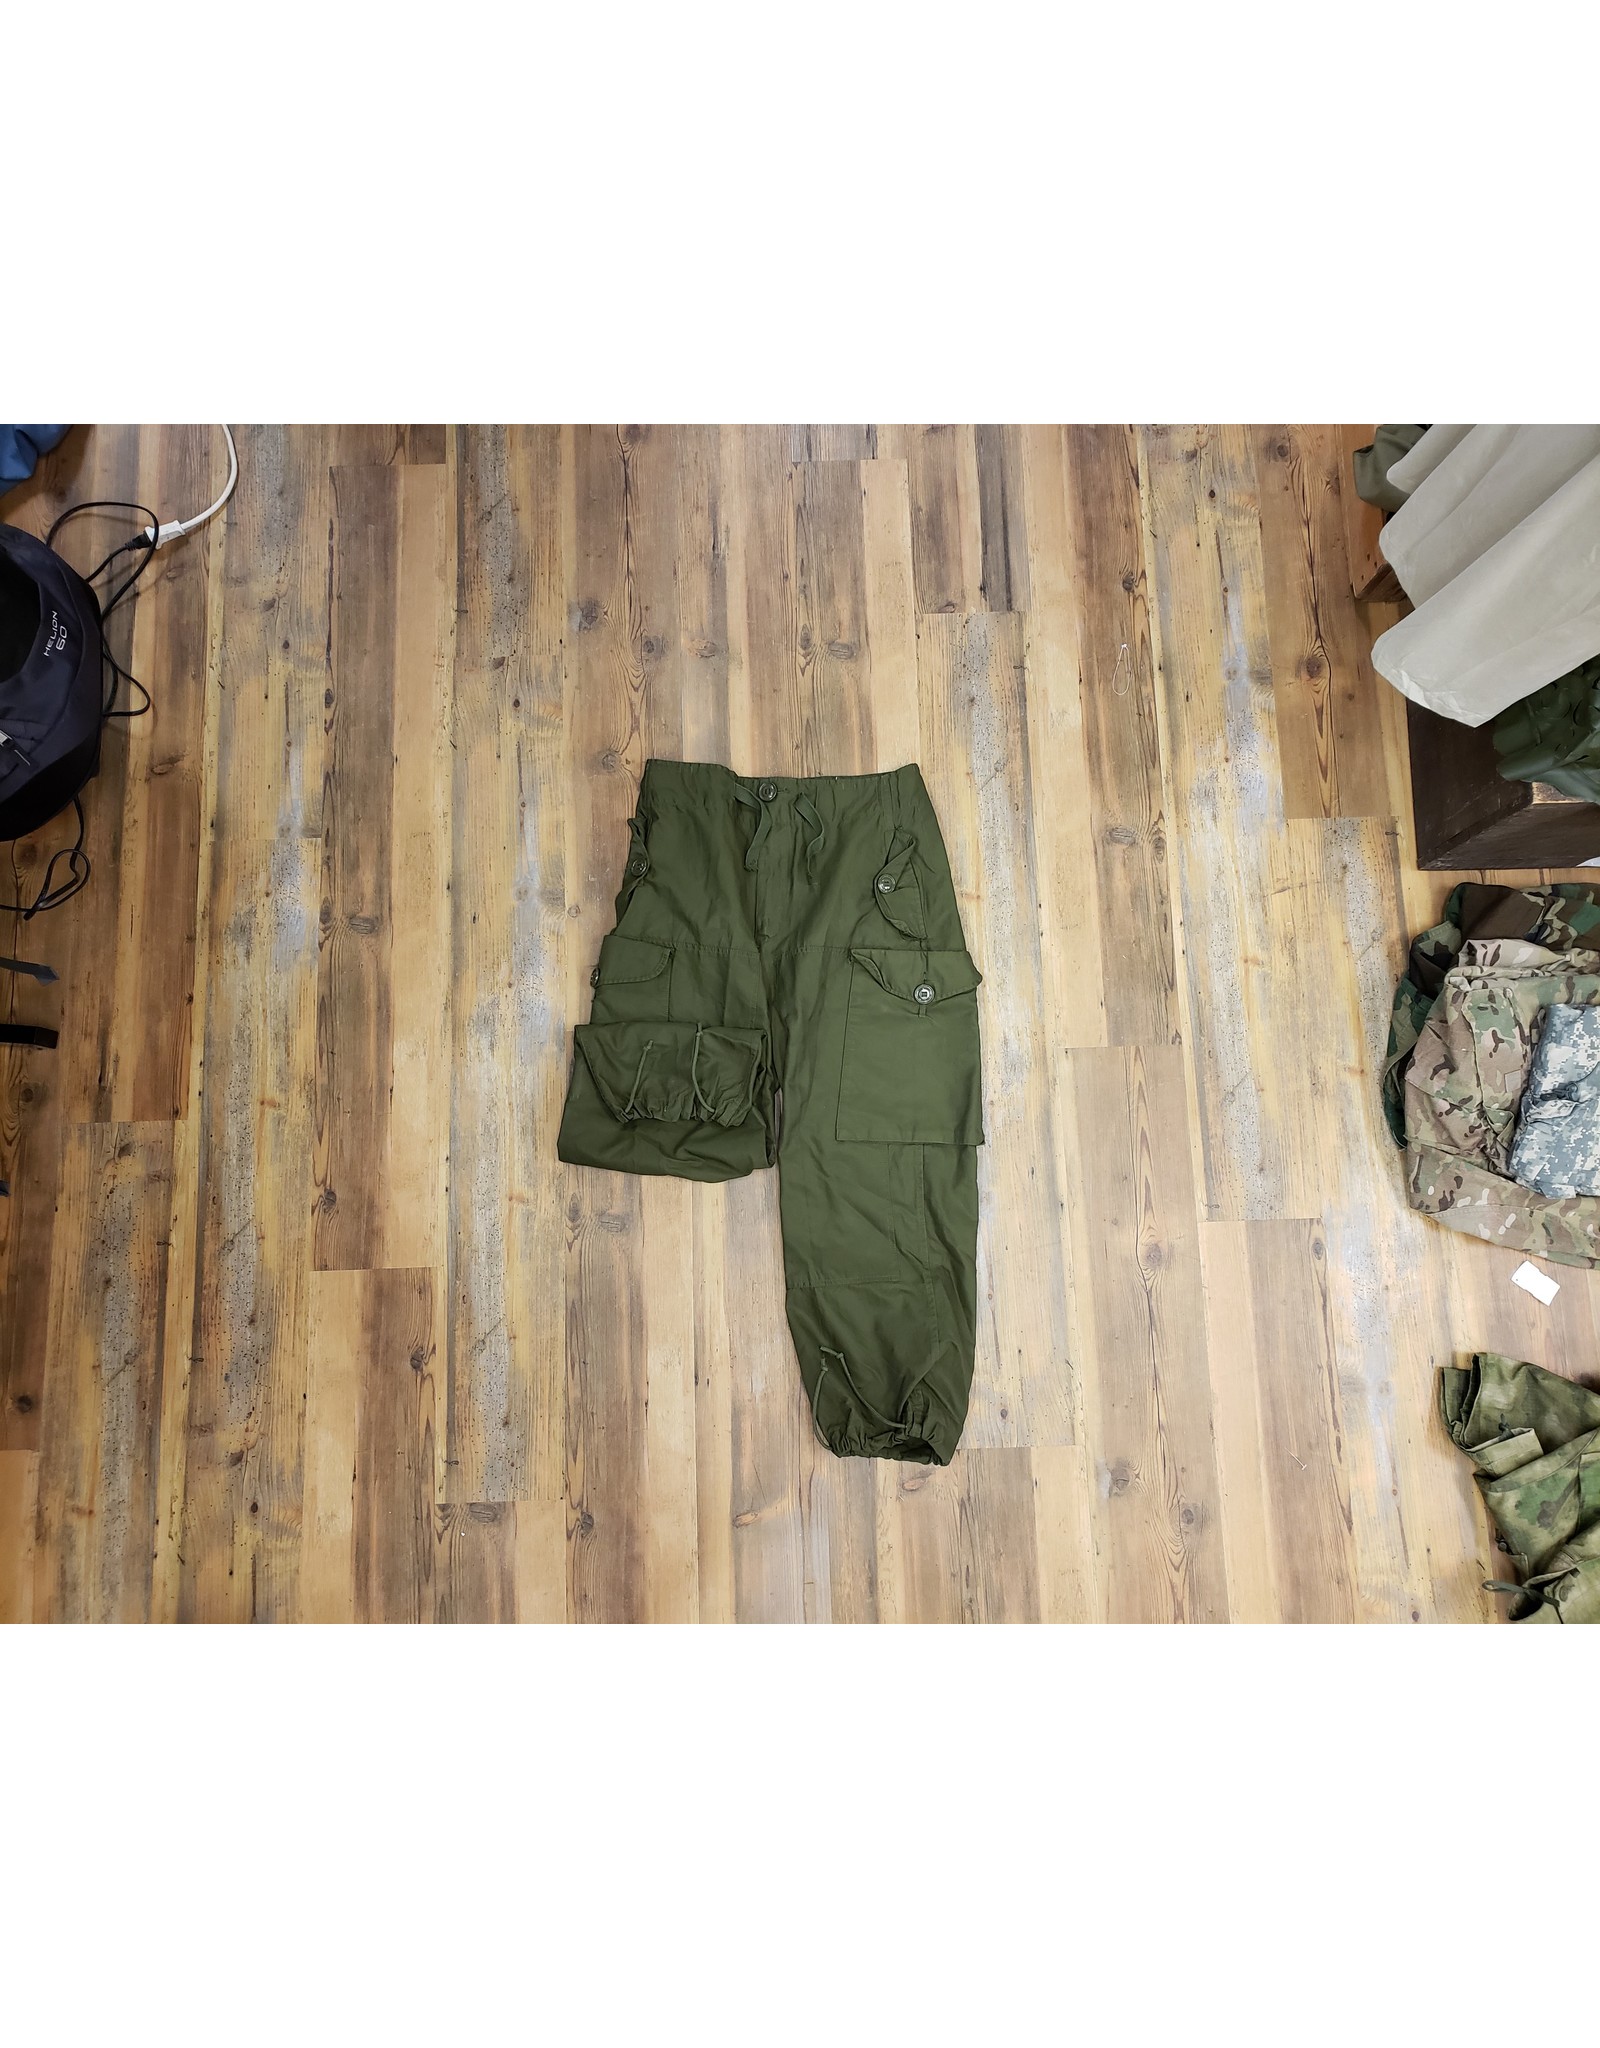 Canadian Forces Wind Pants - Frontier Firearms & Army Surplus